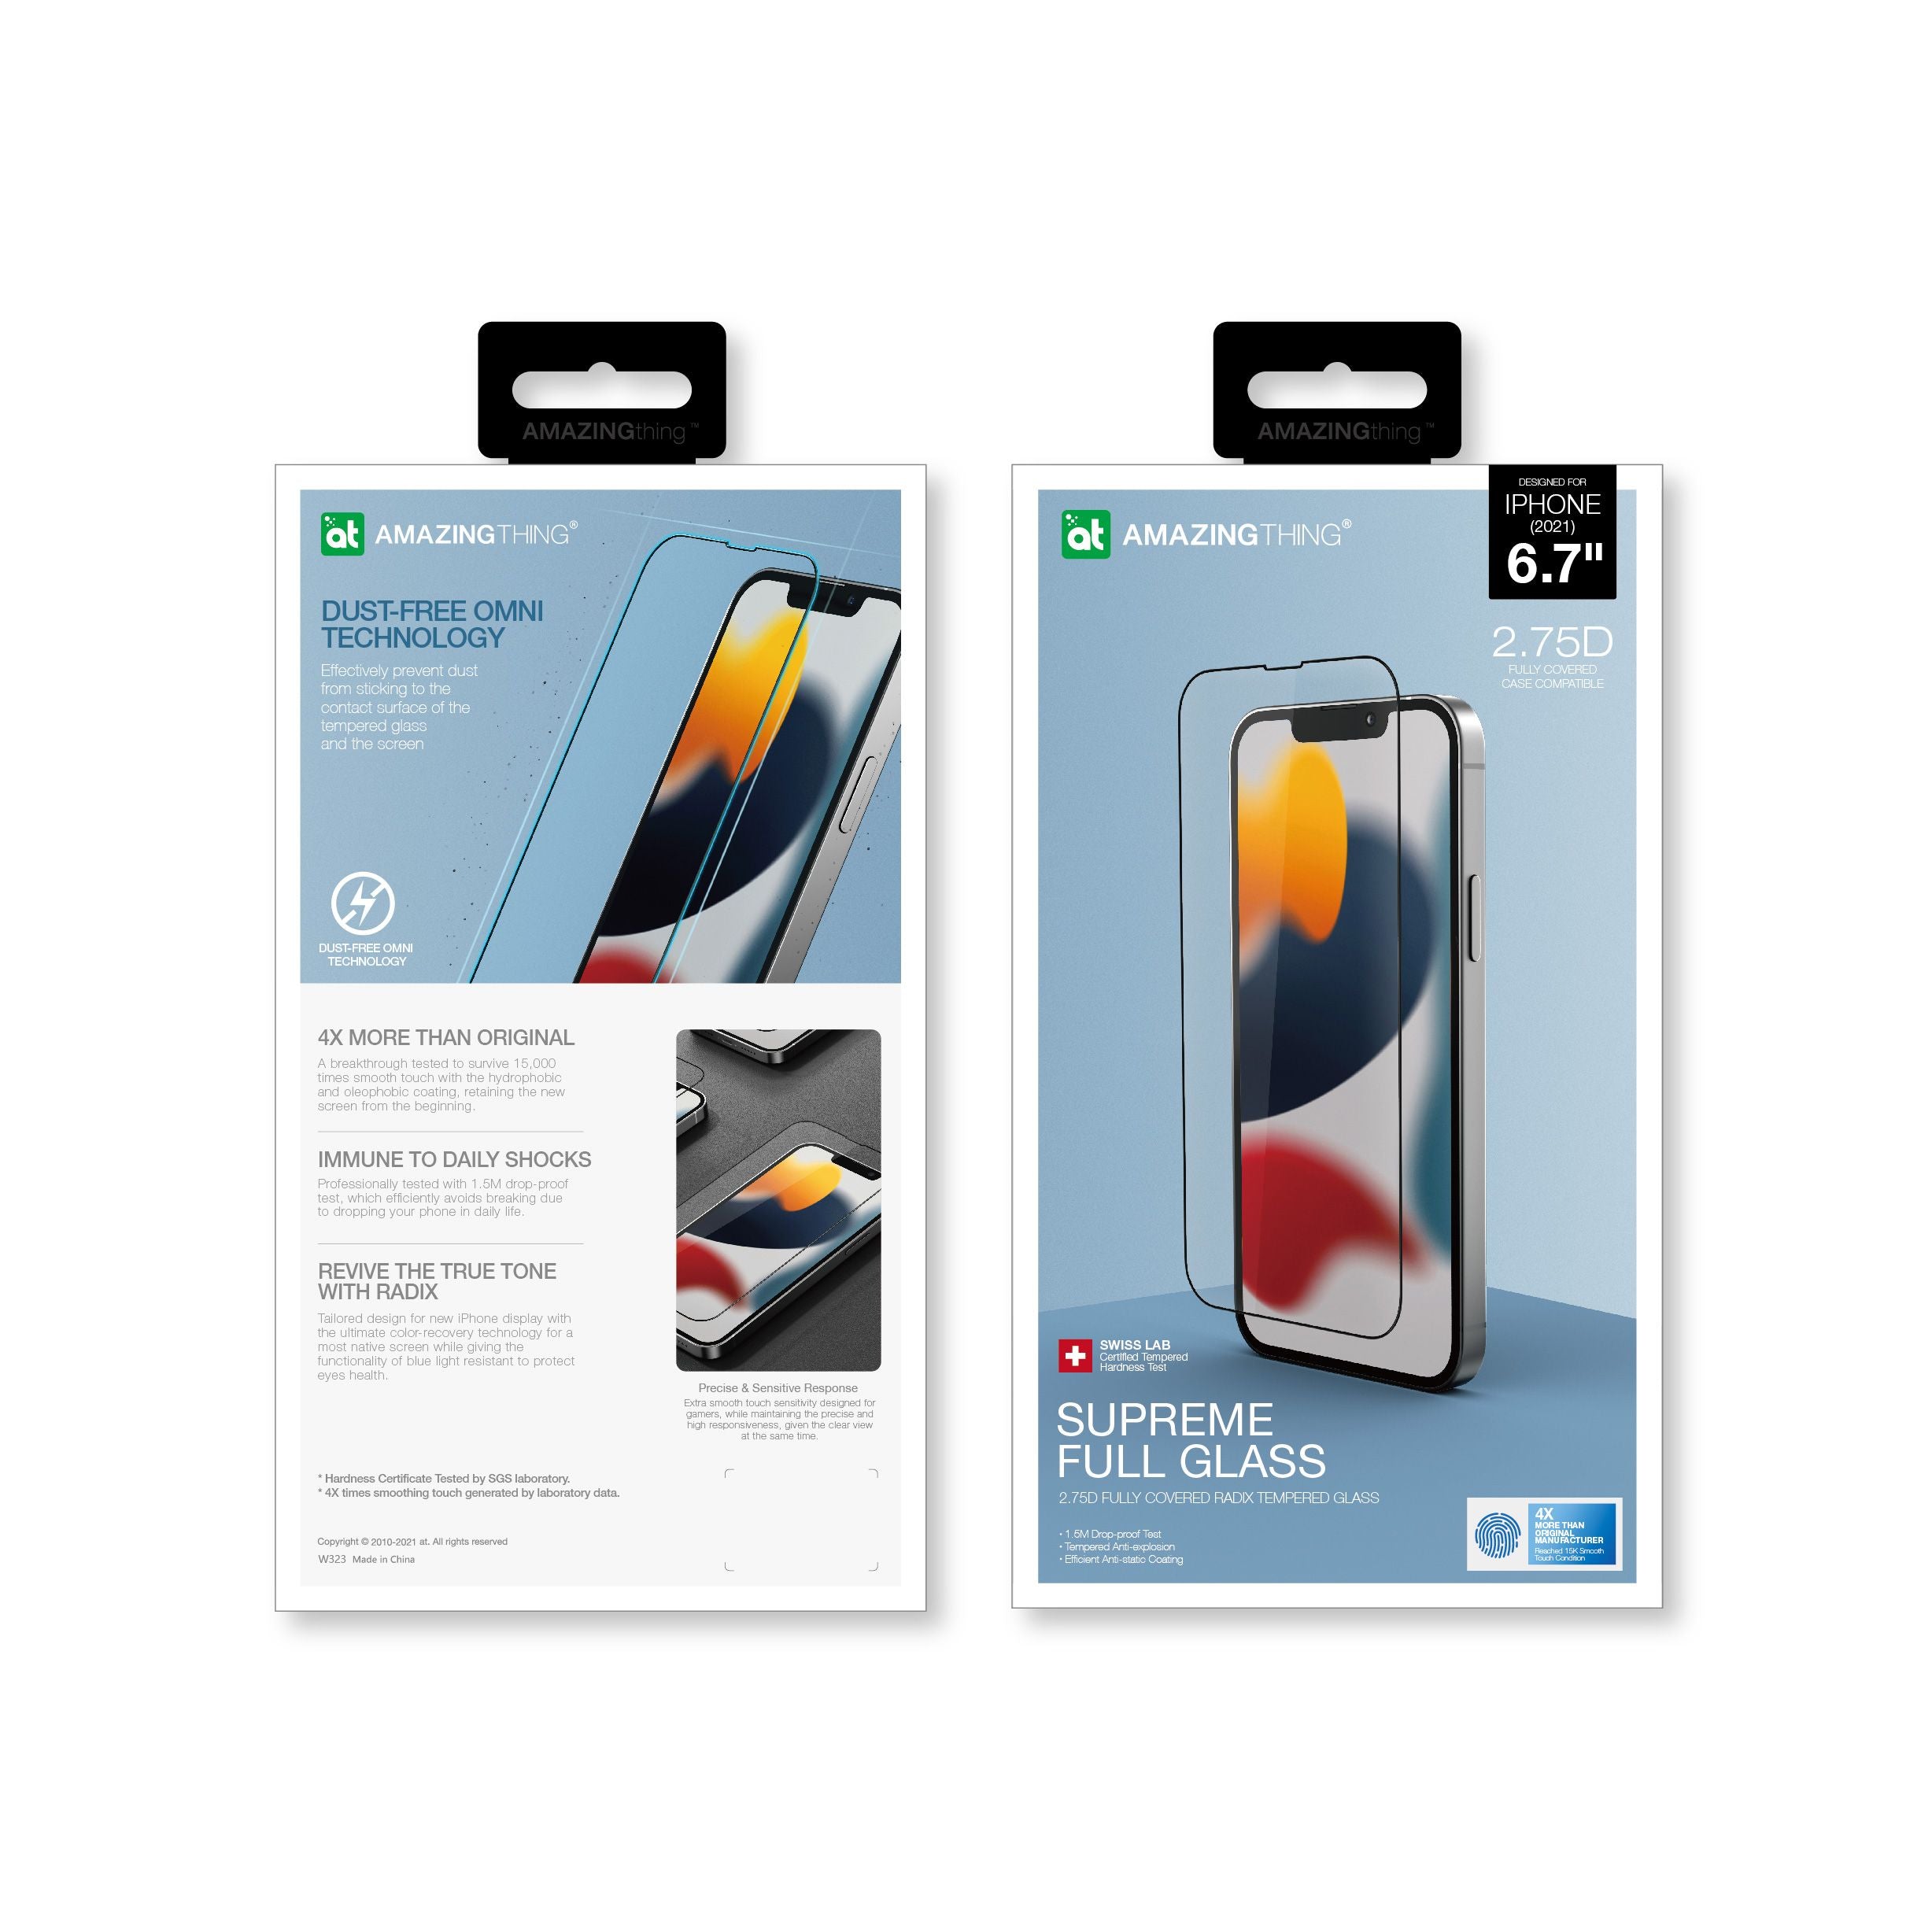 AMAZINGthing 2.75D Fully Covered Radix Tempered Glass Screen Protector - iPhone 13 Pro Max - Clear